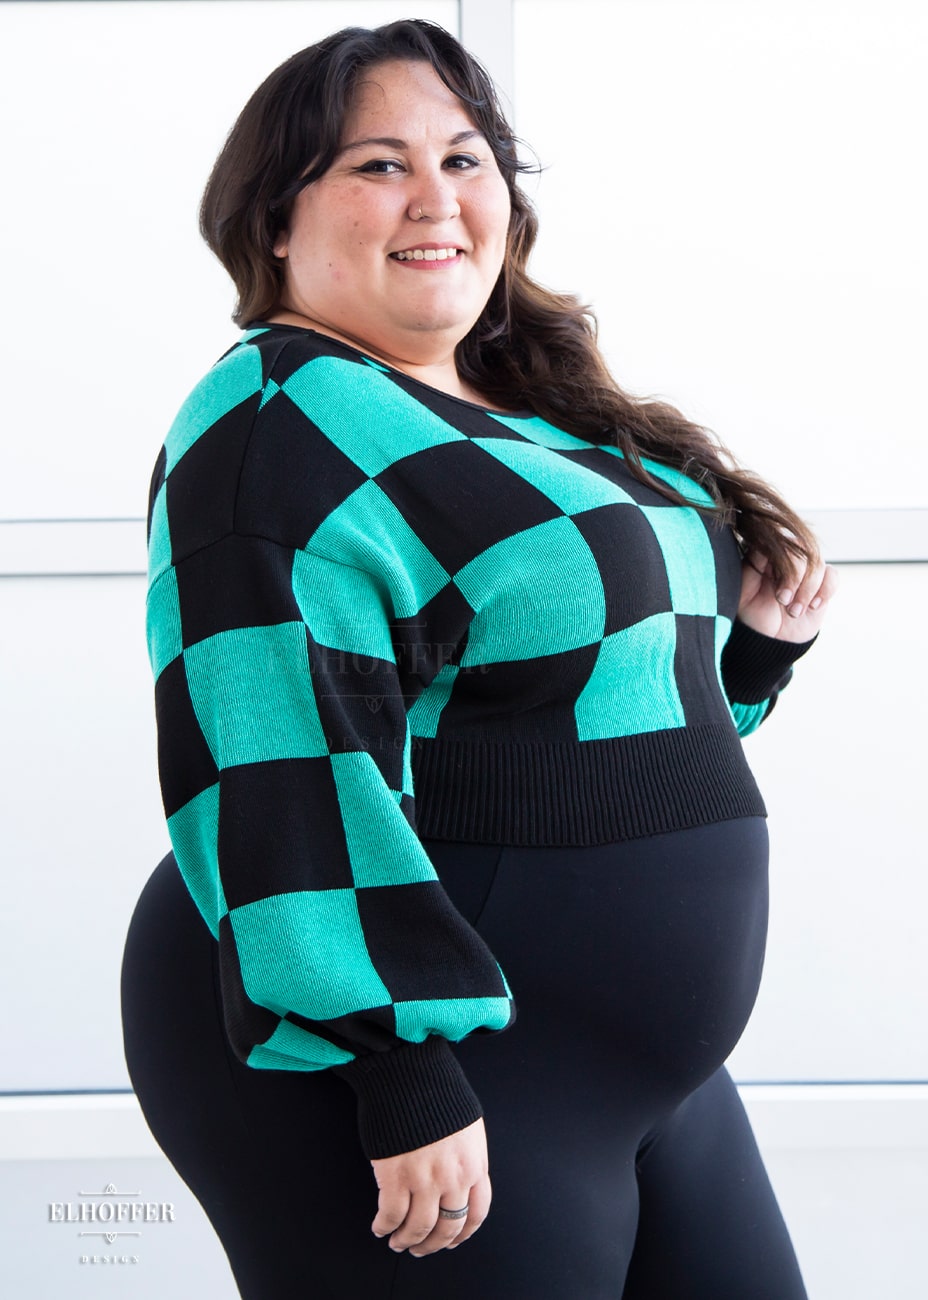 Alysia, a sun kissed skin 2xl model with long dark brown curly hair, is smiling while wearing a cropped oversize sweater with a black and green chessboard pattern and long billowing sleeves.  She paired the sweater with black leggings.